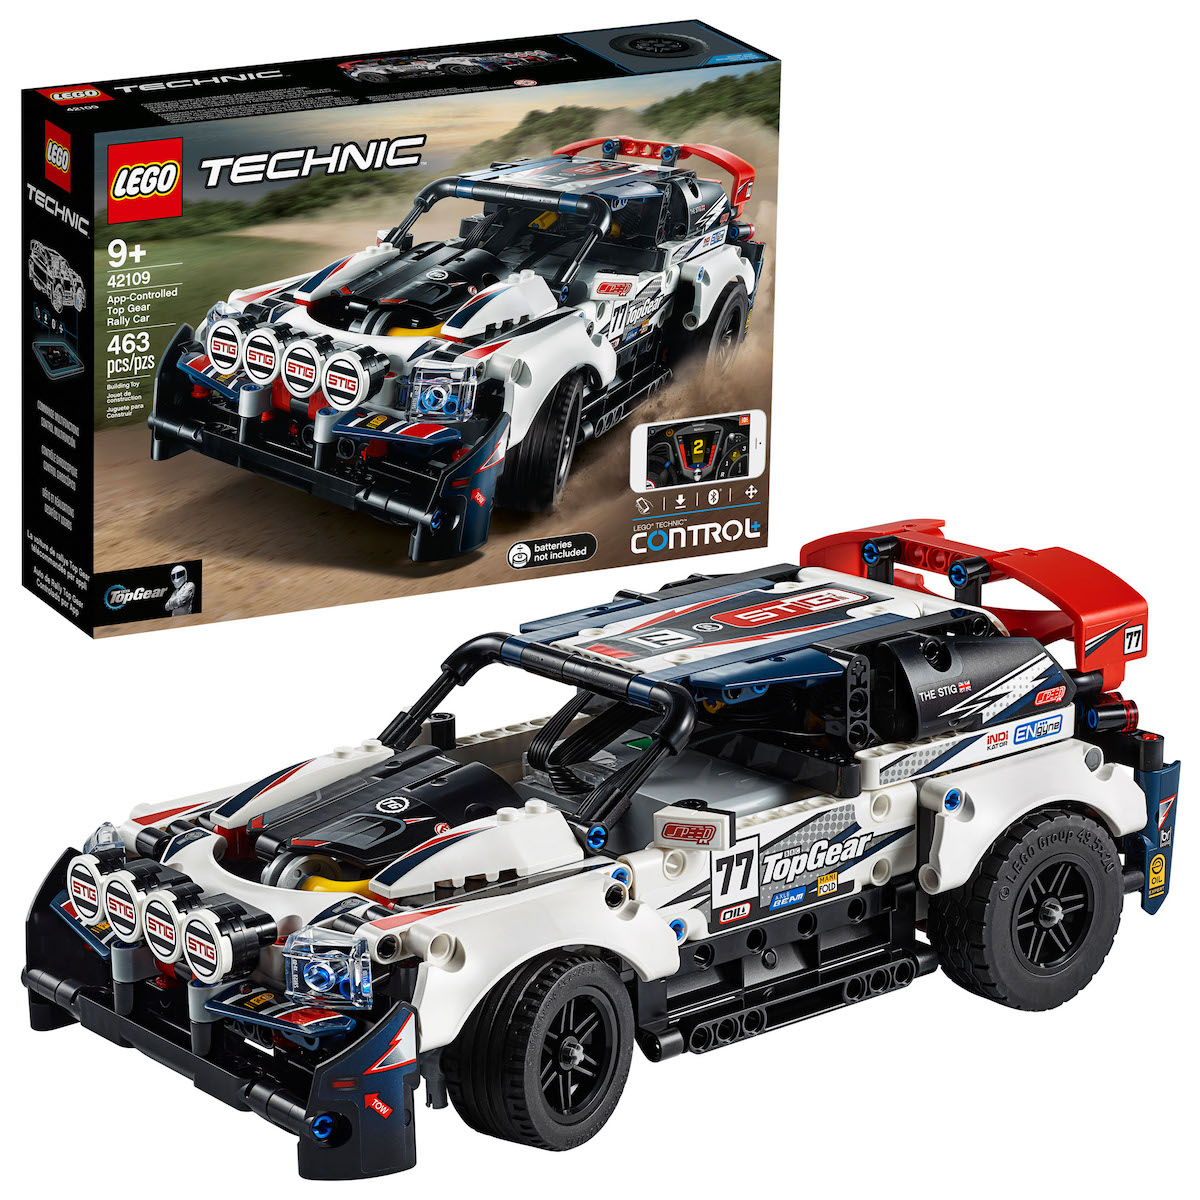 The set is heavy on make-believe sponsors to go alongside the heavy 'The Stig' branding around the car. This is typical for LEGO's own brand sets, but alongside the real-world Top Gear branding looks slightly odd. The design of the model overall is good though, squared off proportions and the white/black/navy blue colour scheme with red accents really makes it resemble a WRC challenger.